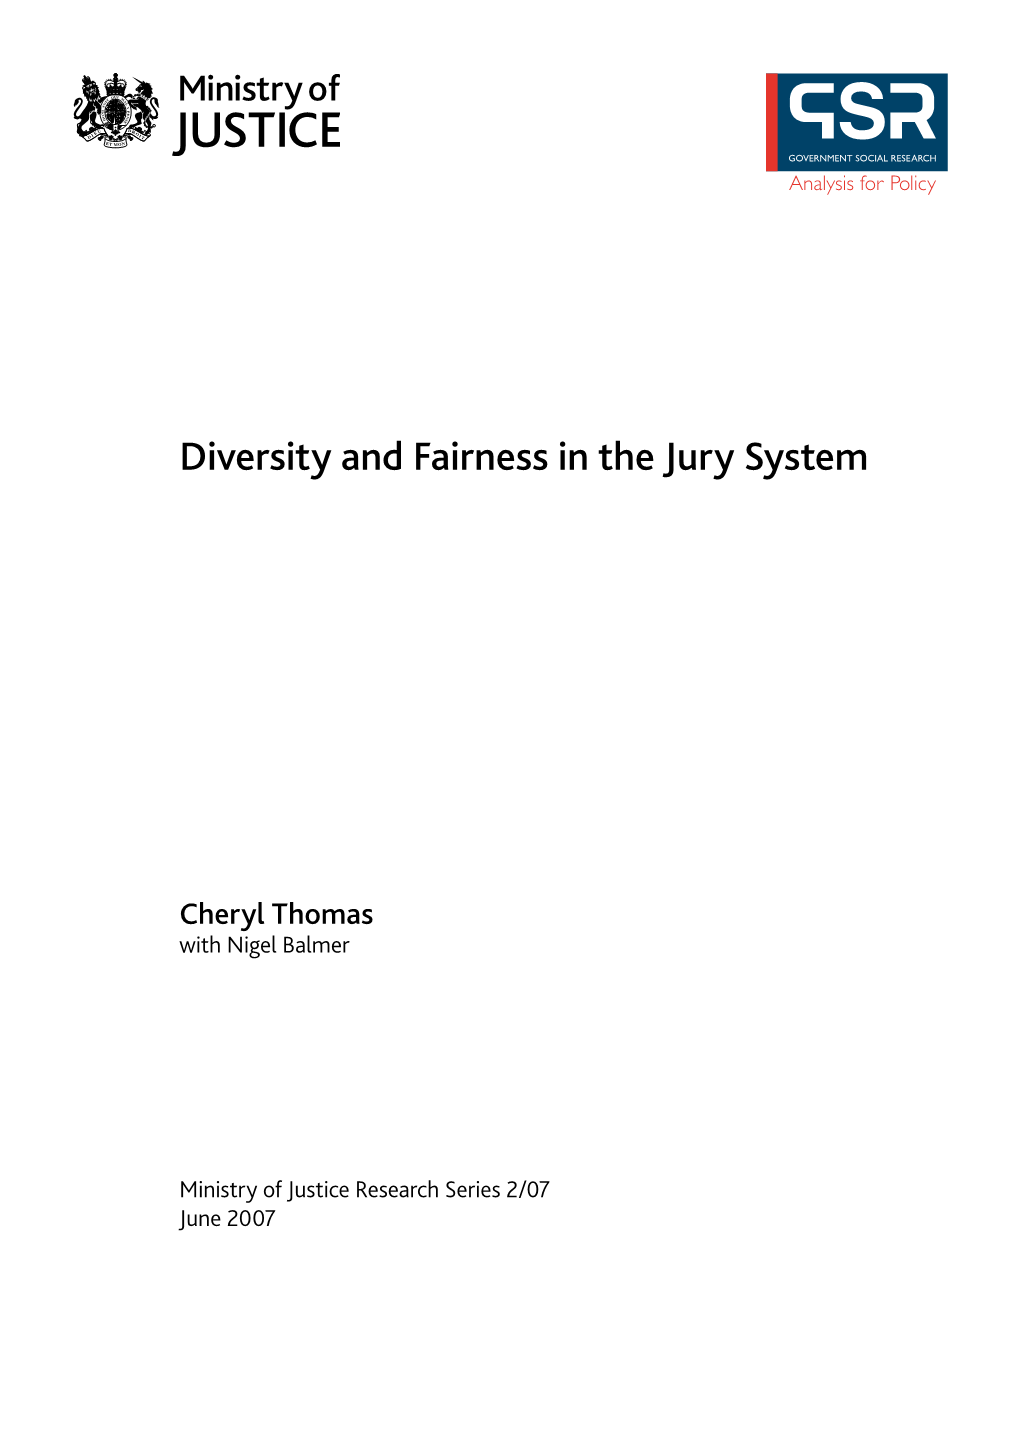 Diversity and Fairness in the Jury System